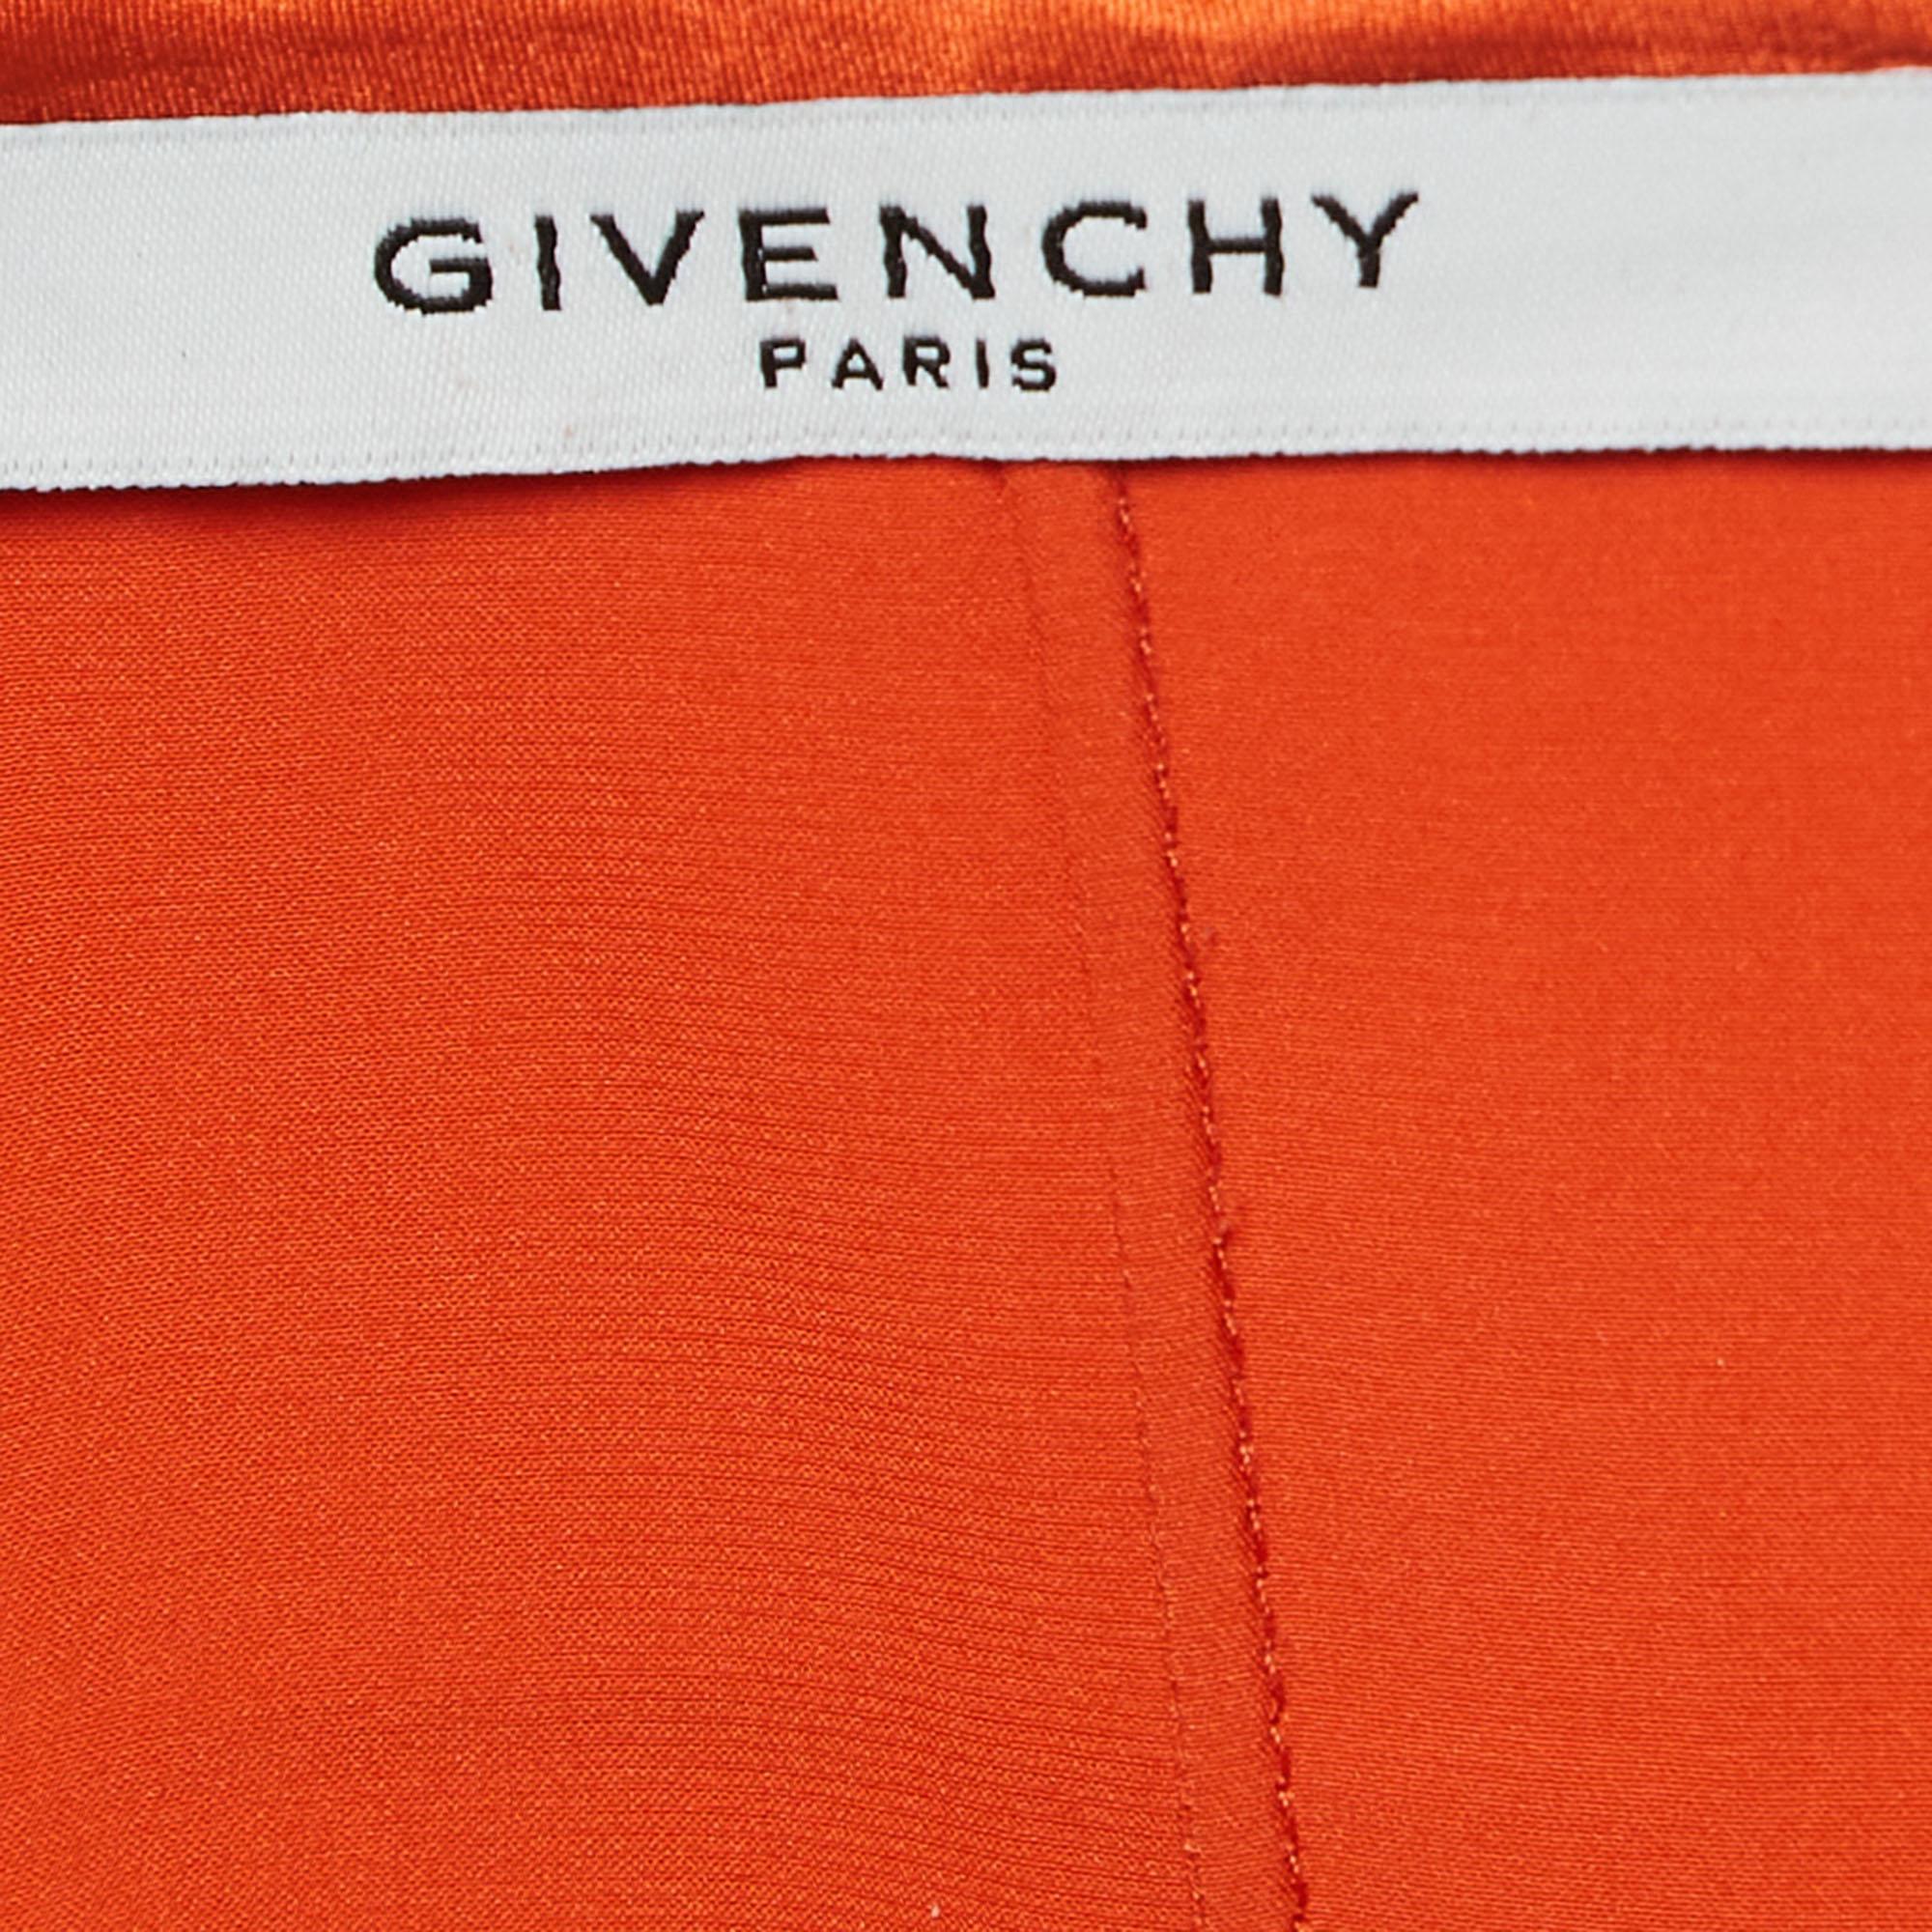 Wrap yourself in elegance with the Givenchy dress. Crafted to perfection, this masterpiece features a vibrant orange hue that captivates the eye. Its sleeveless design and layered silhouette exude modernity and grace. Complete with a chic belted